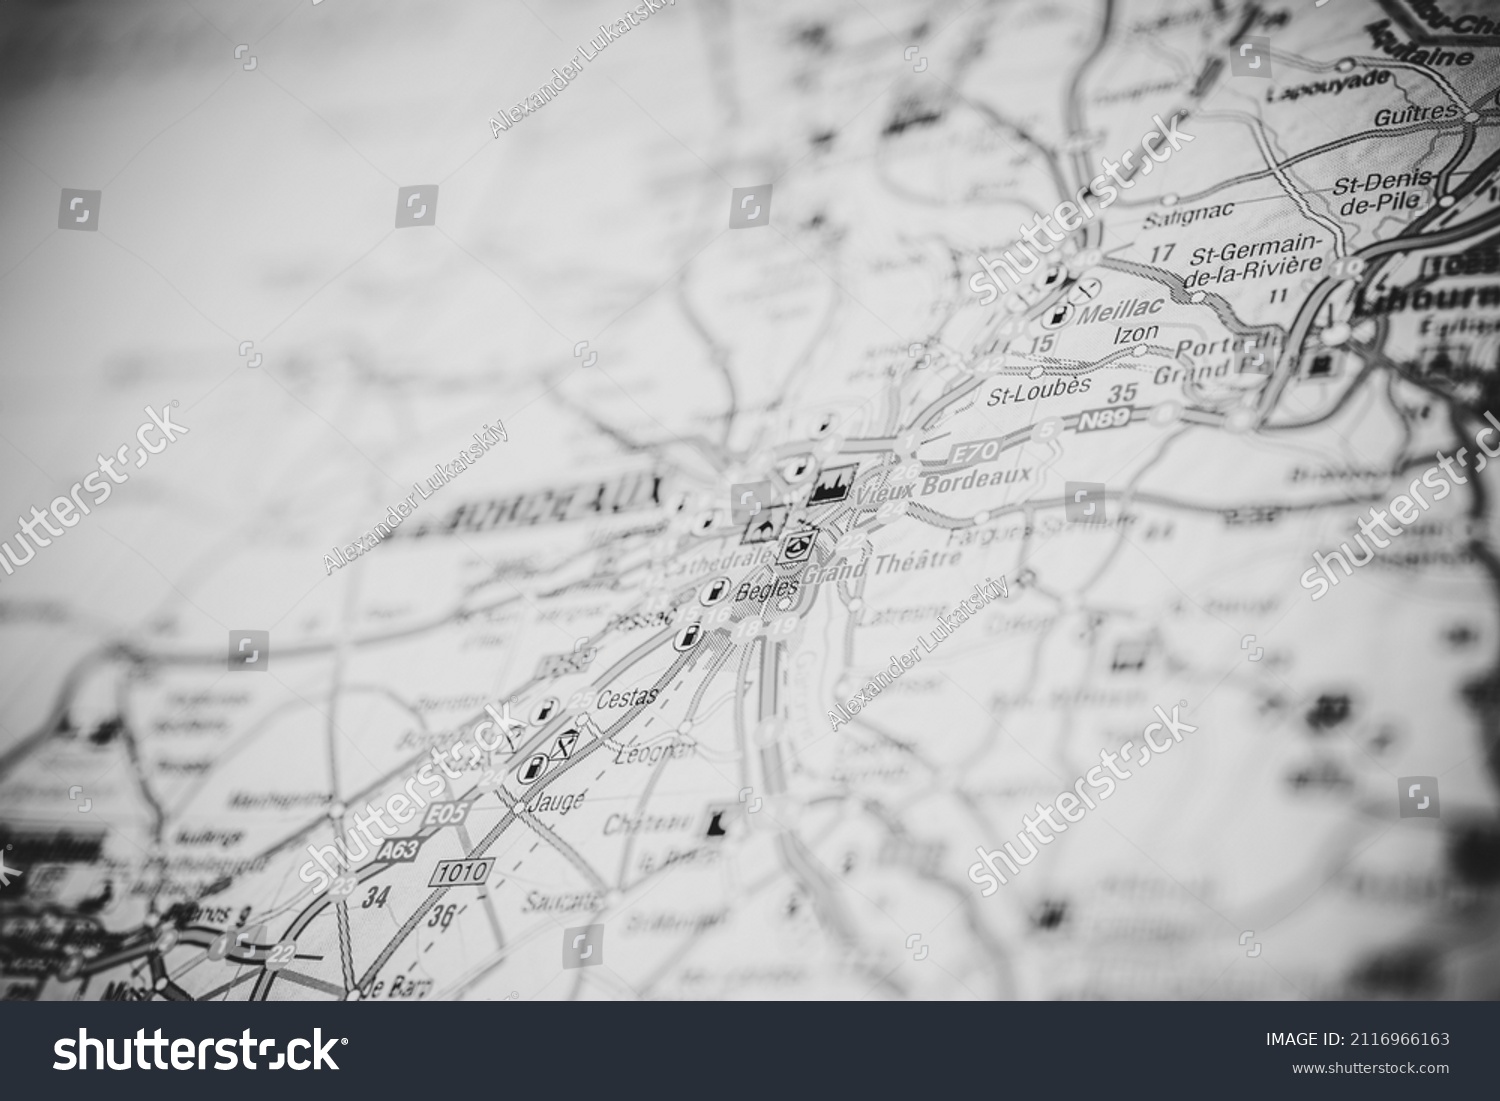 Stock Photo Bordeaux On The Europe Map 2116966163 